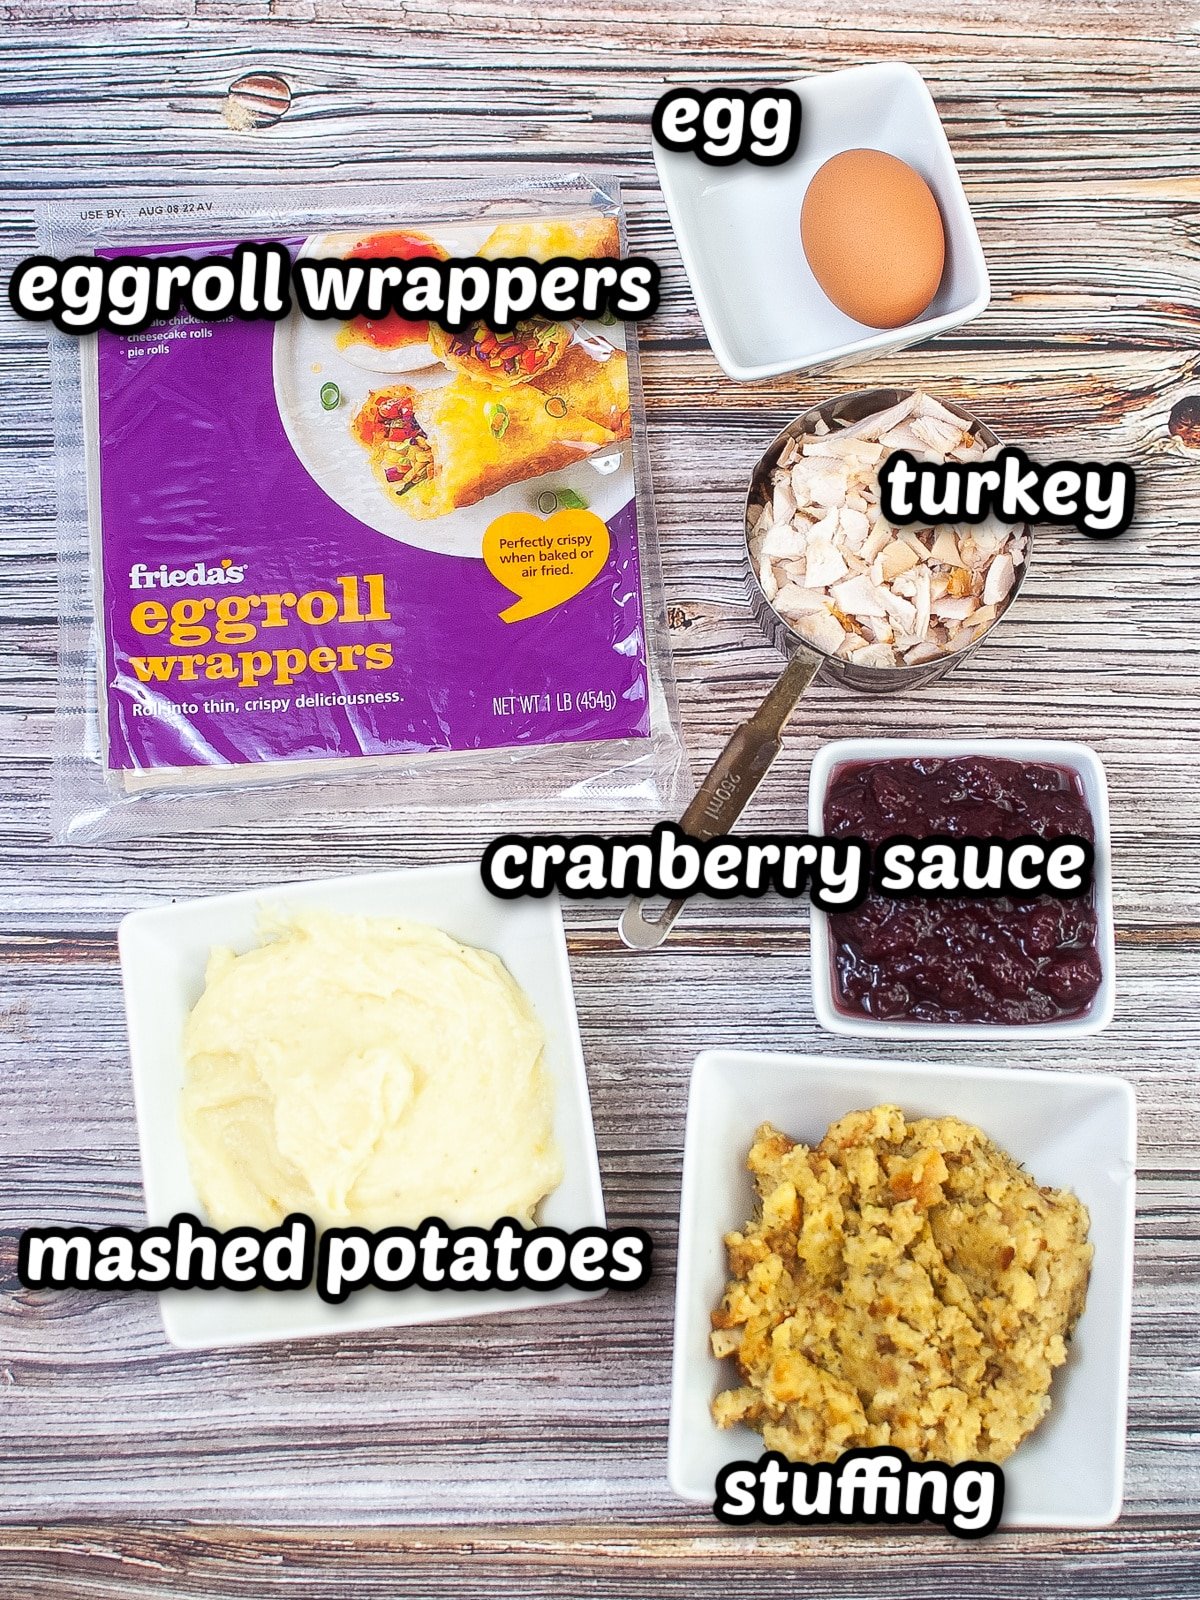 The ingredients for thanksgiving eggrolls are shown on a wooden table.